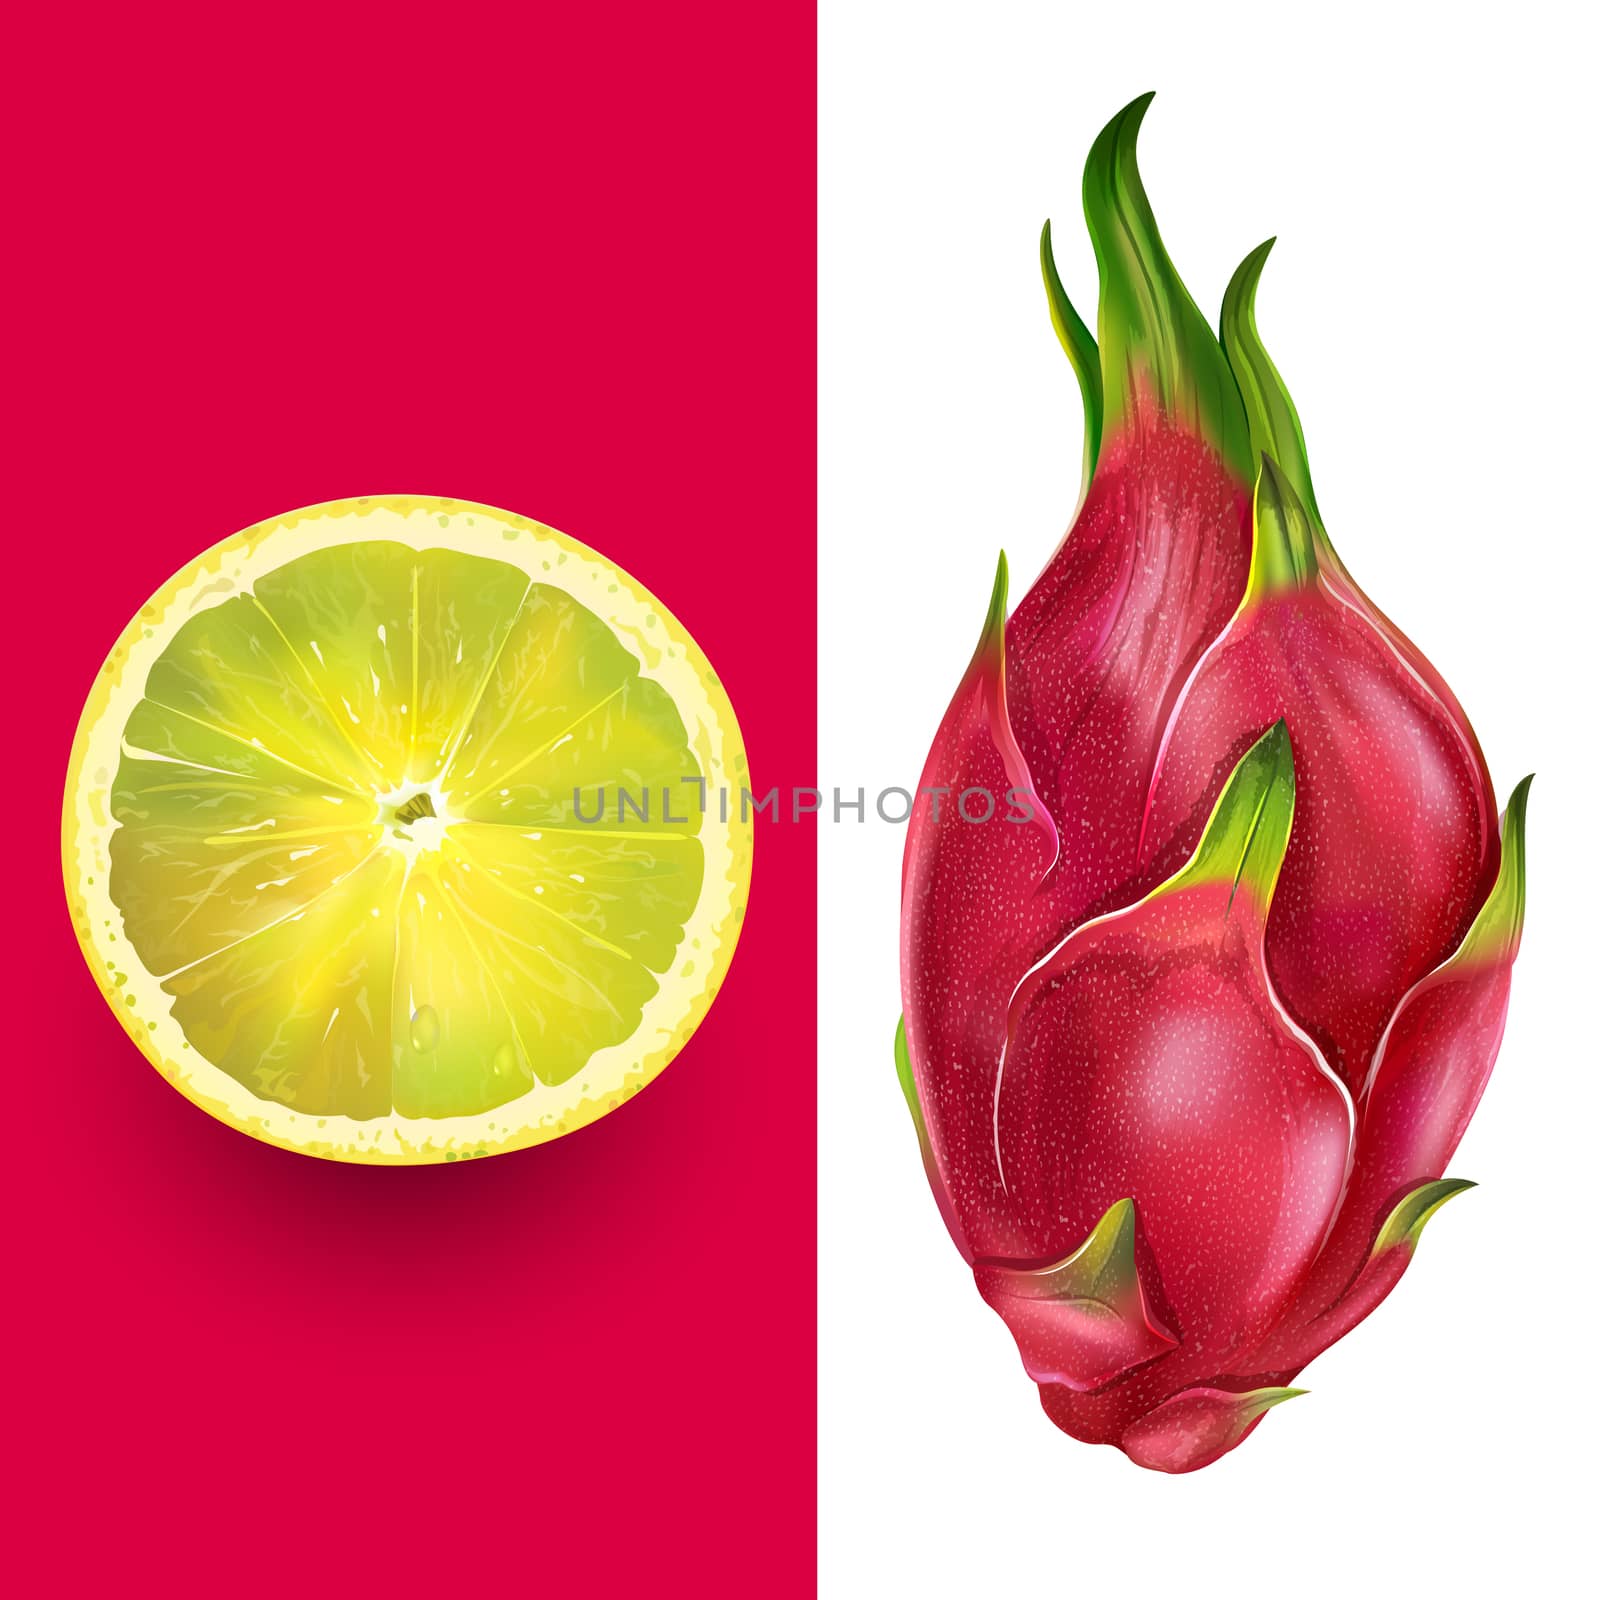 Dragon fruit and lemon on a red and yellow background.